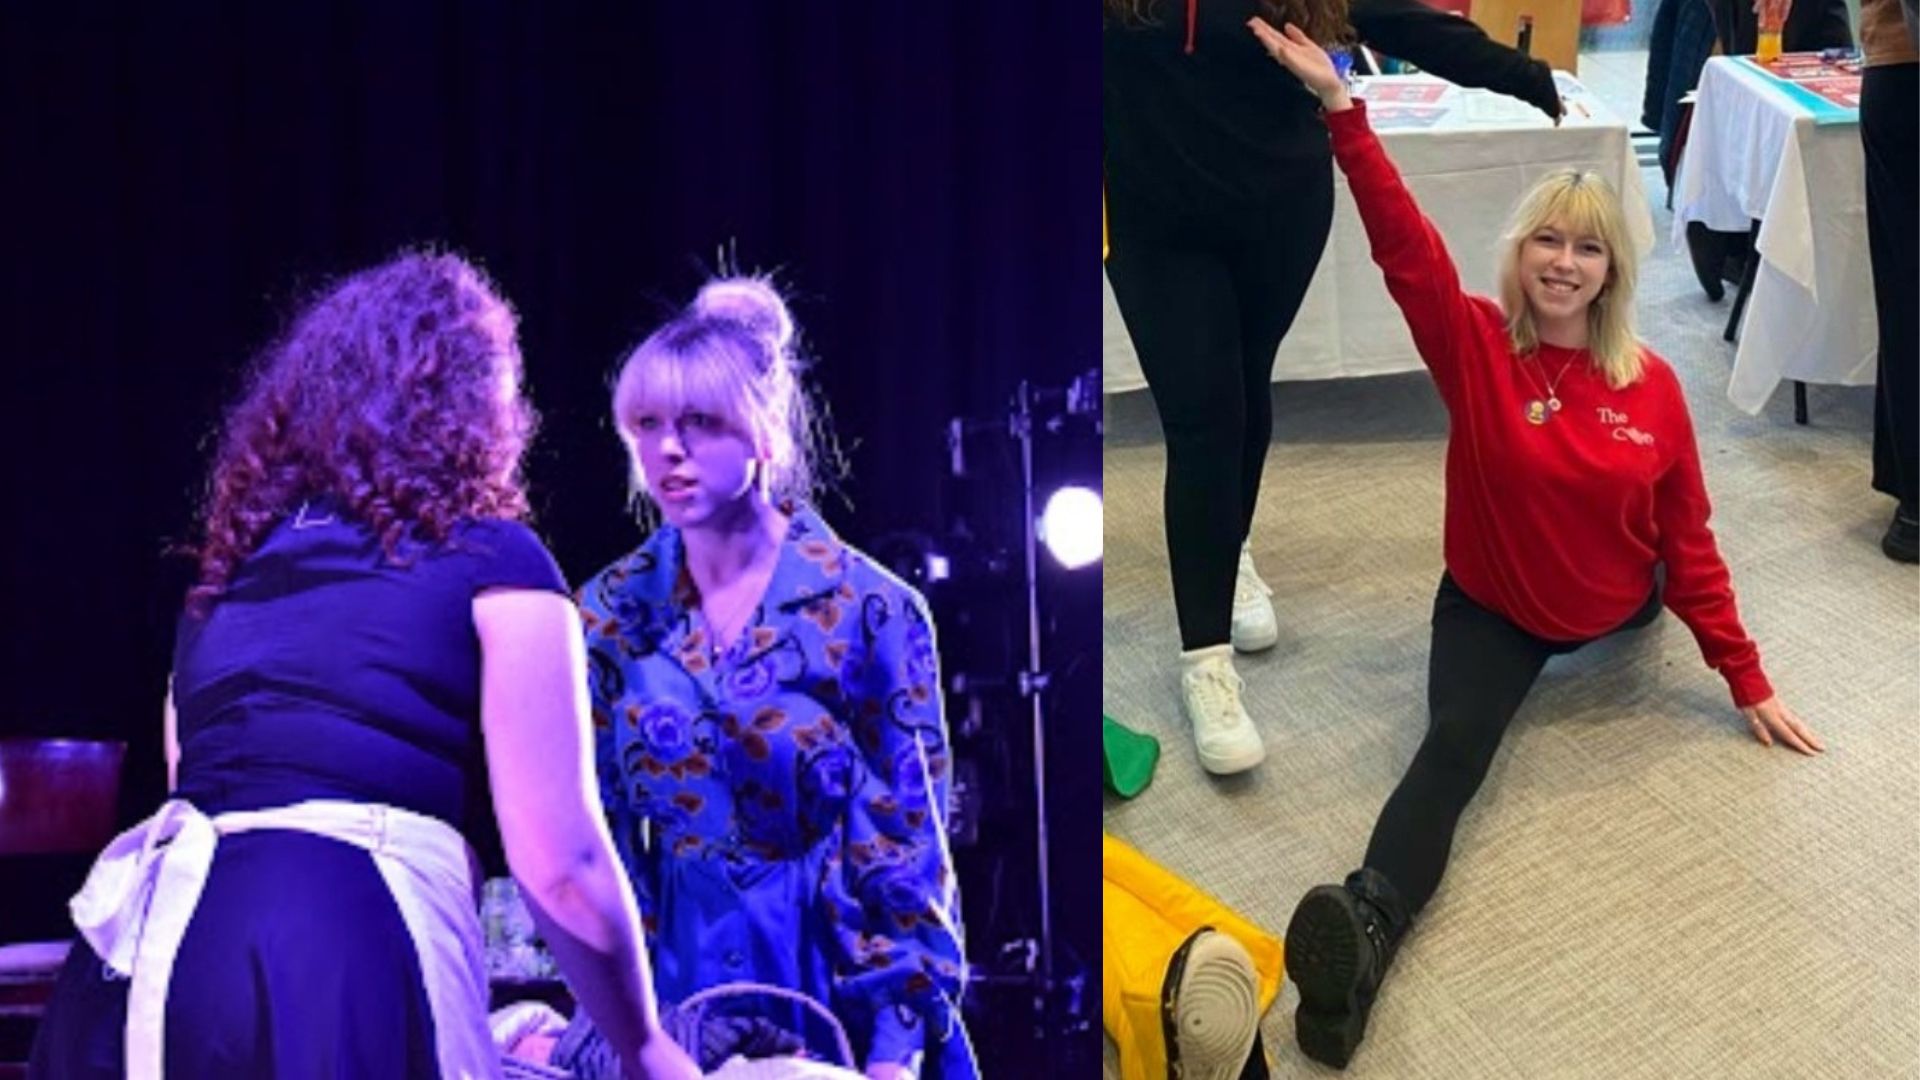 Two pictures of Shannon Flemming. One of her acting on stage. Another of her doing the splits.